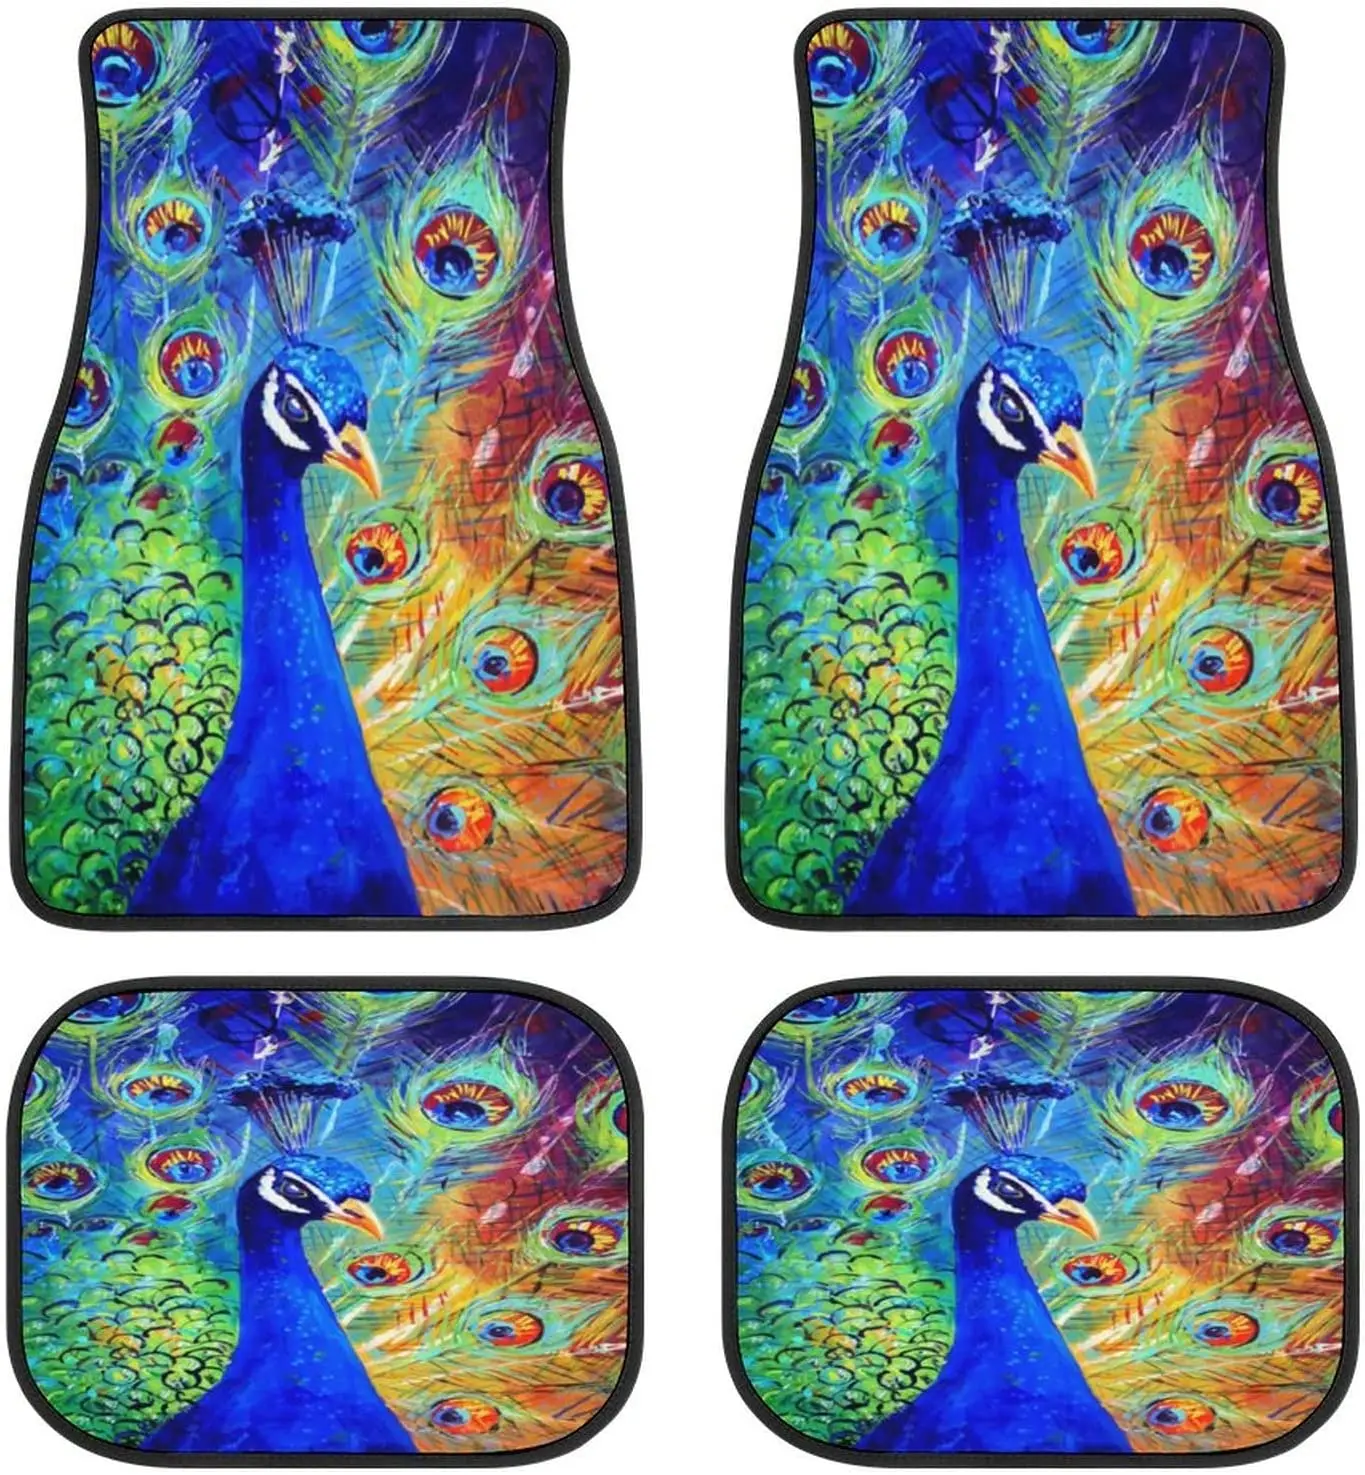 

Animal Peacock Car Mats Aesthetic Universal Drive Seat Carpet Vehicle Interior Protector Mats Funny Designs All-Weather Mats Fit